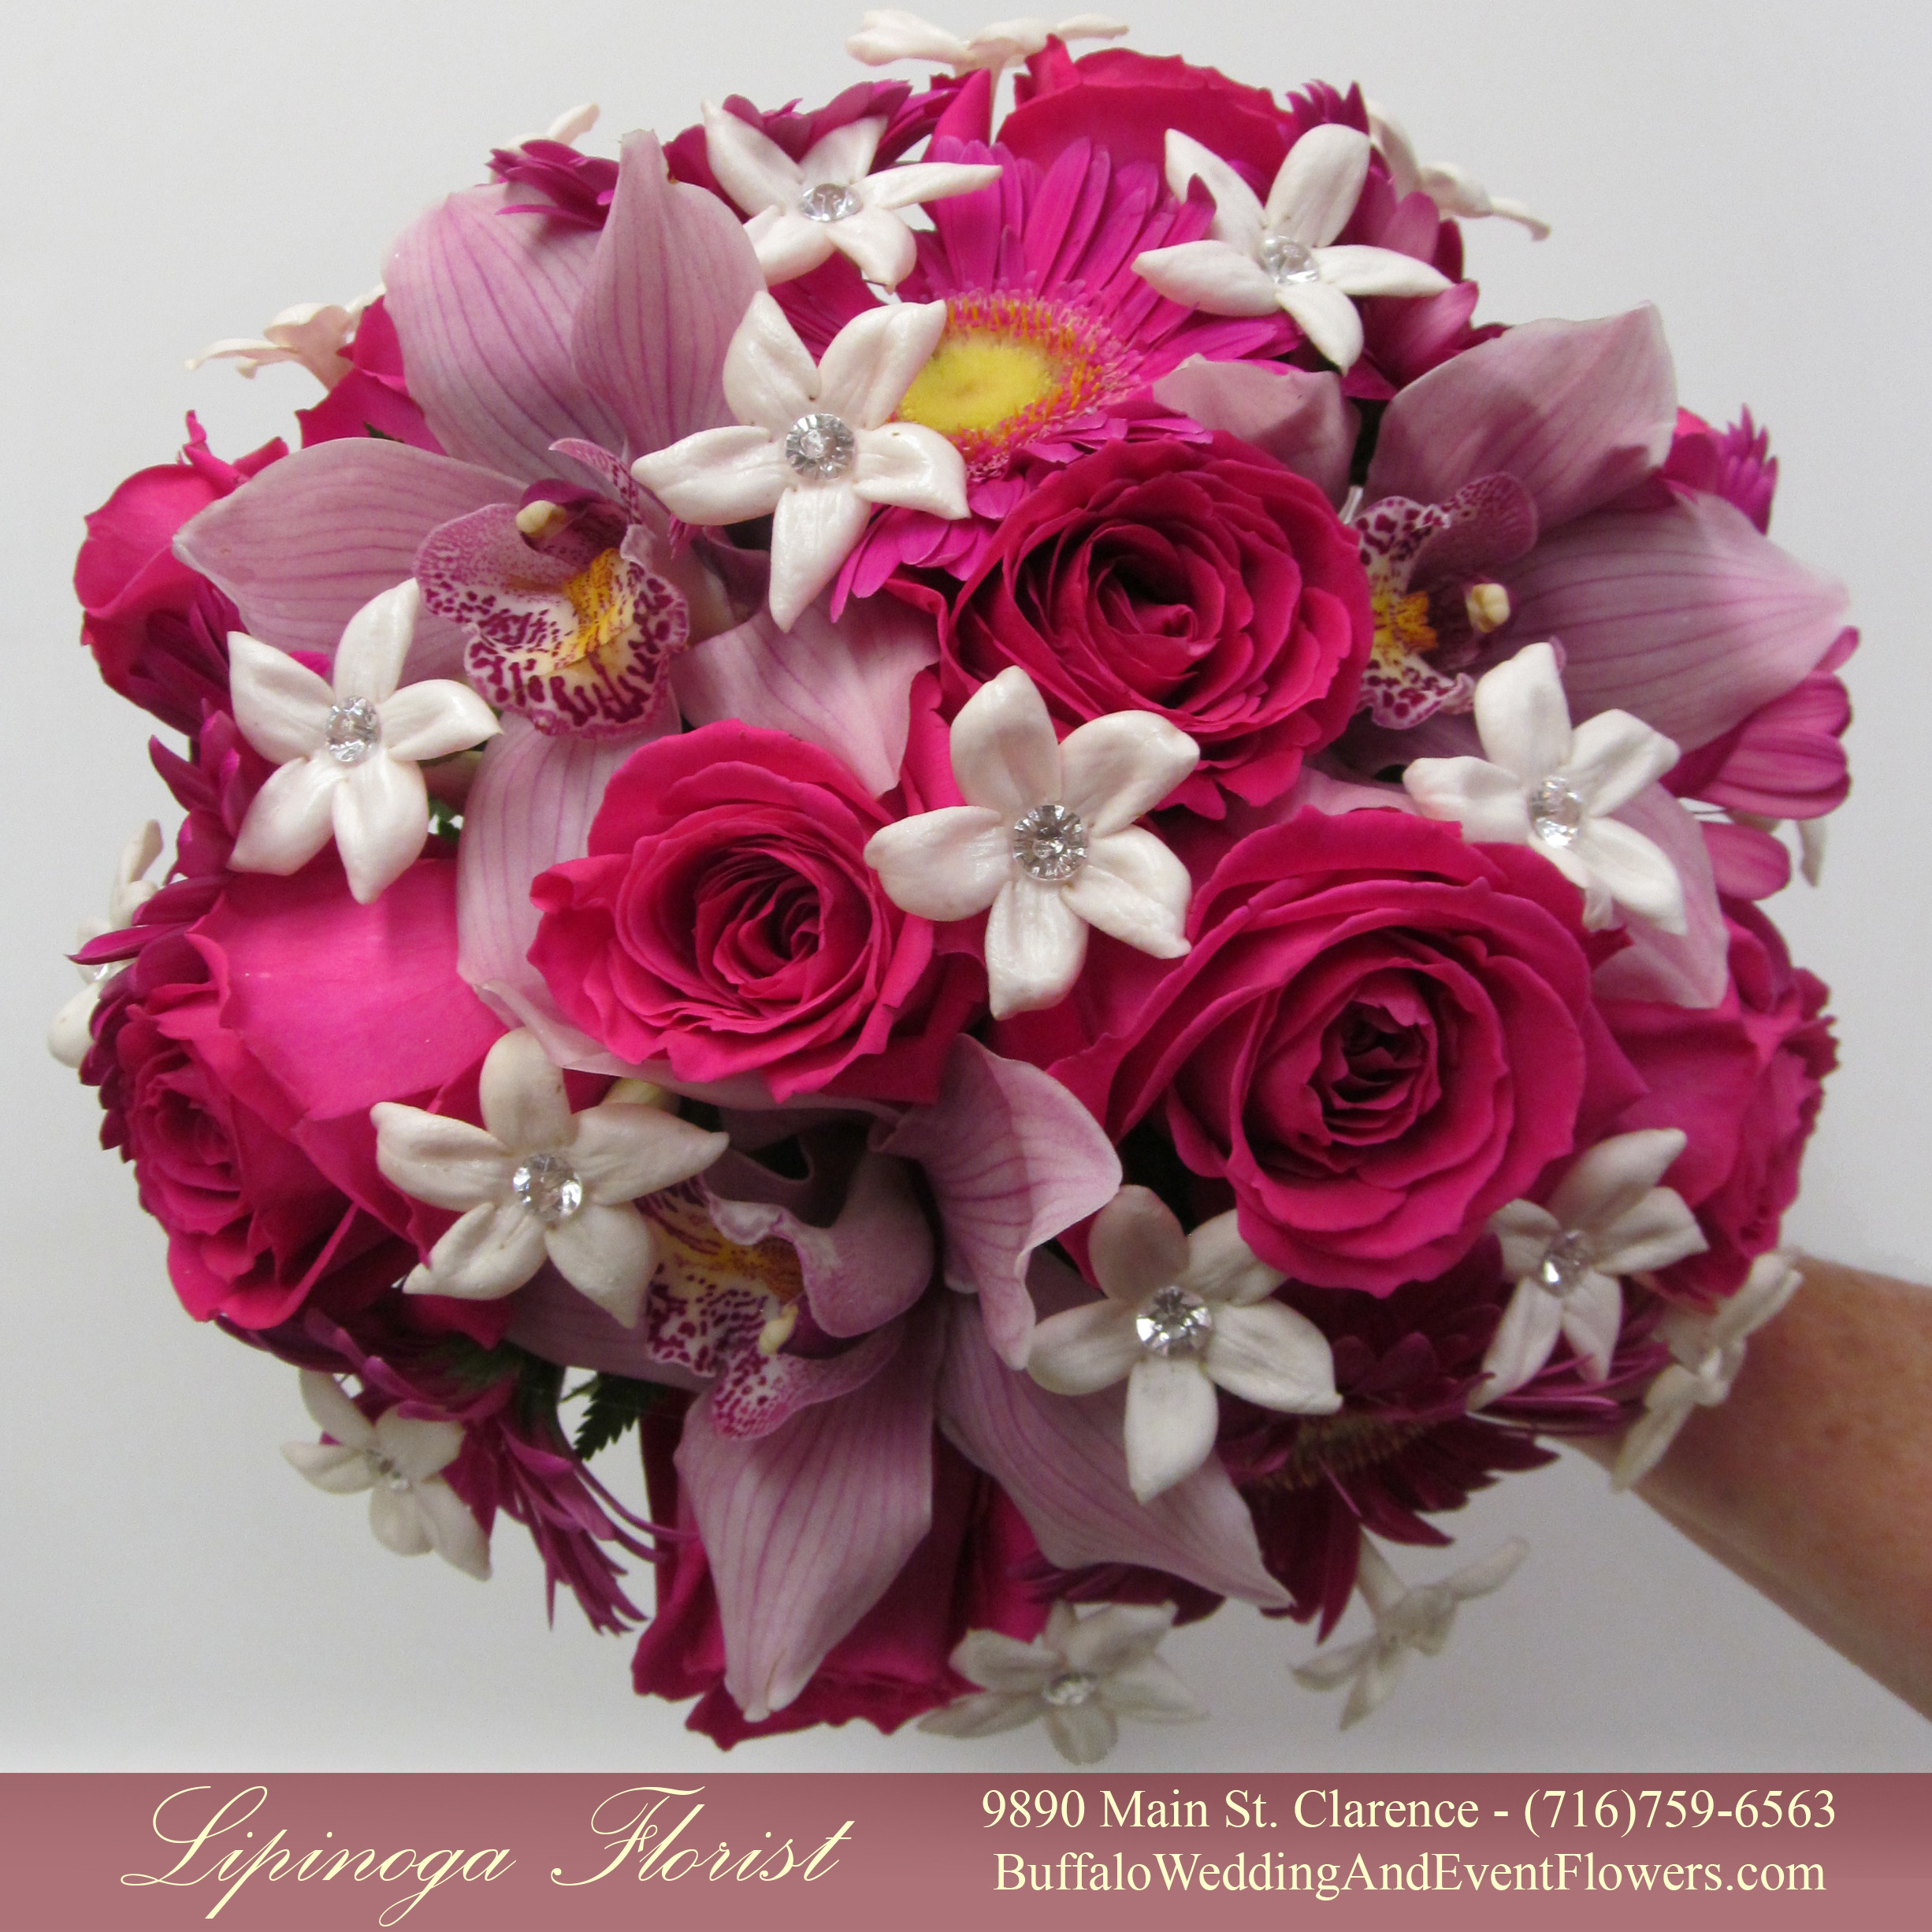 Hot Pink Wedding Flowers
 Hot Pink Wedding Flowers at Brierwood Country Club in